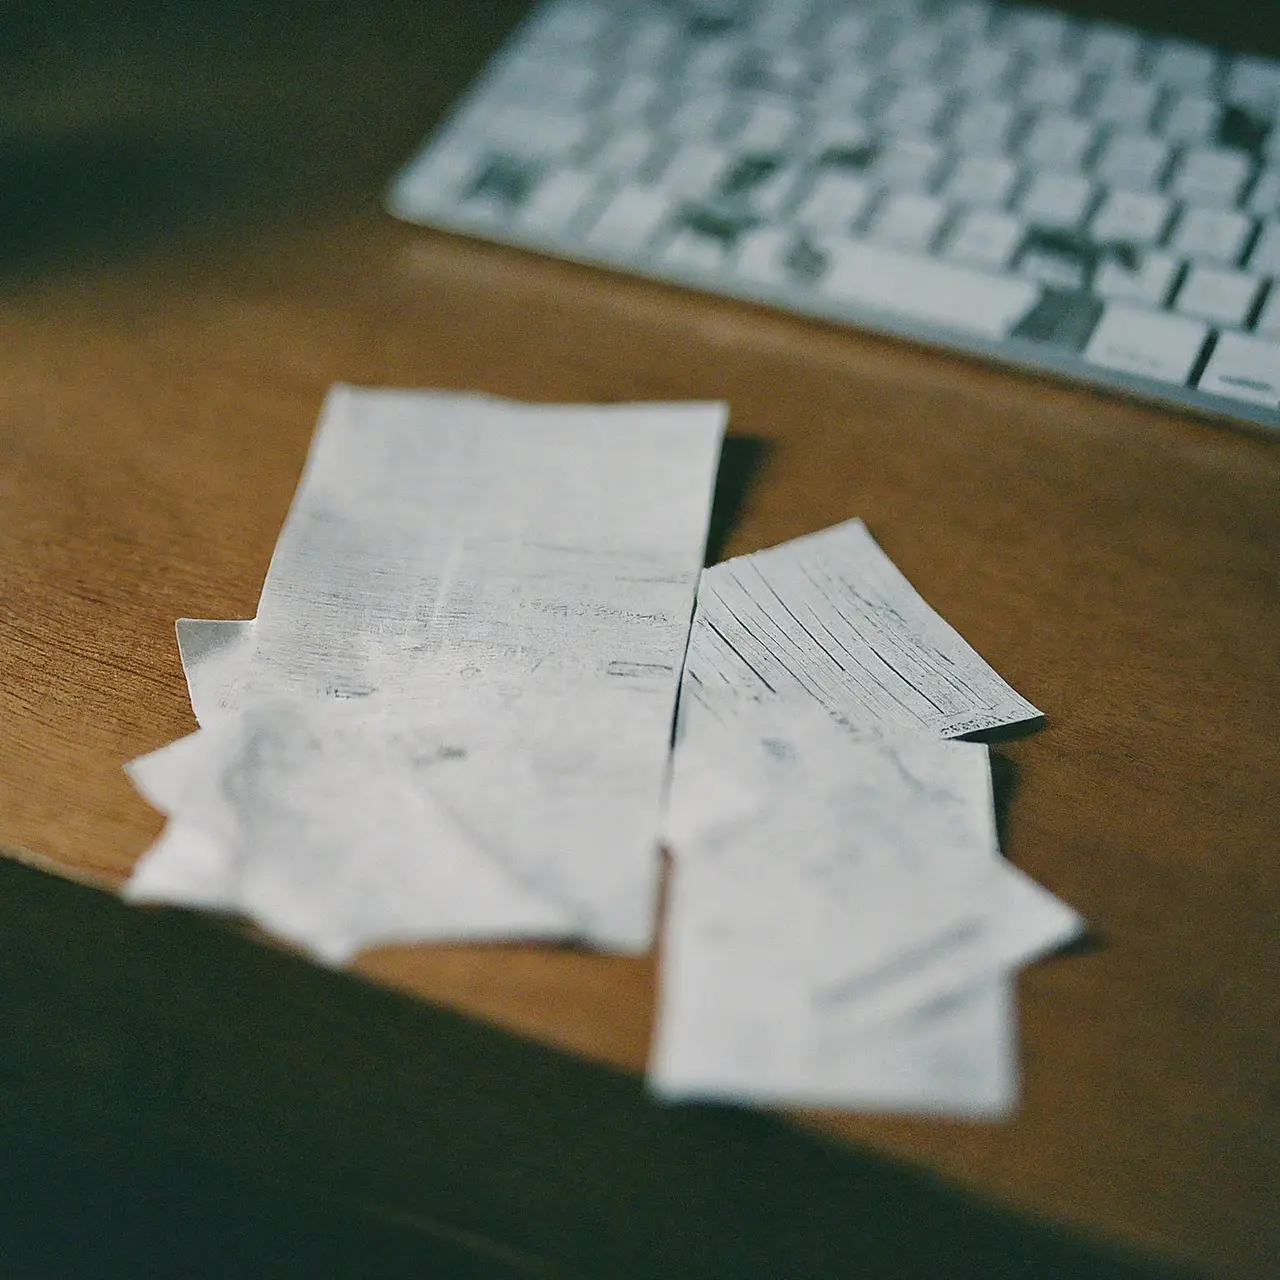 Piles of paper receipts scattered across a sleek desk. 35mm stock photo